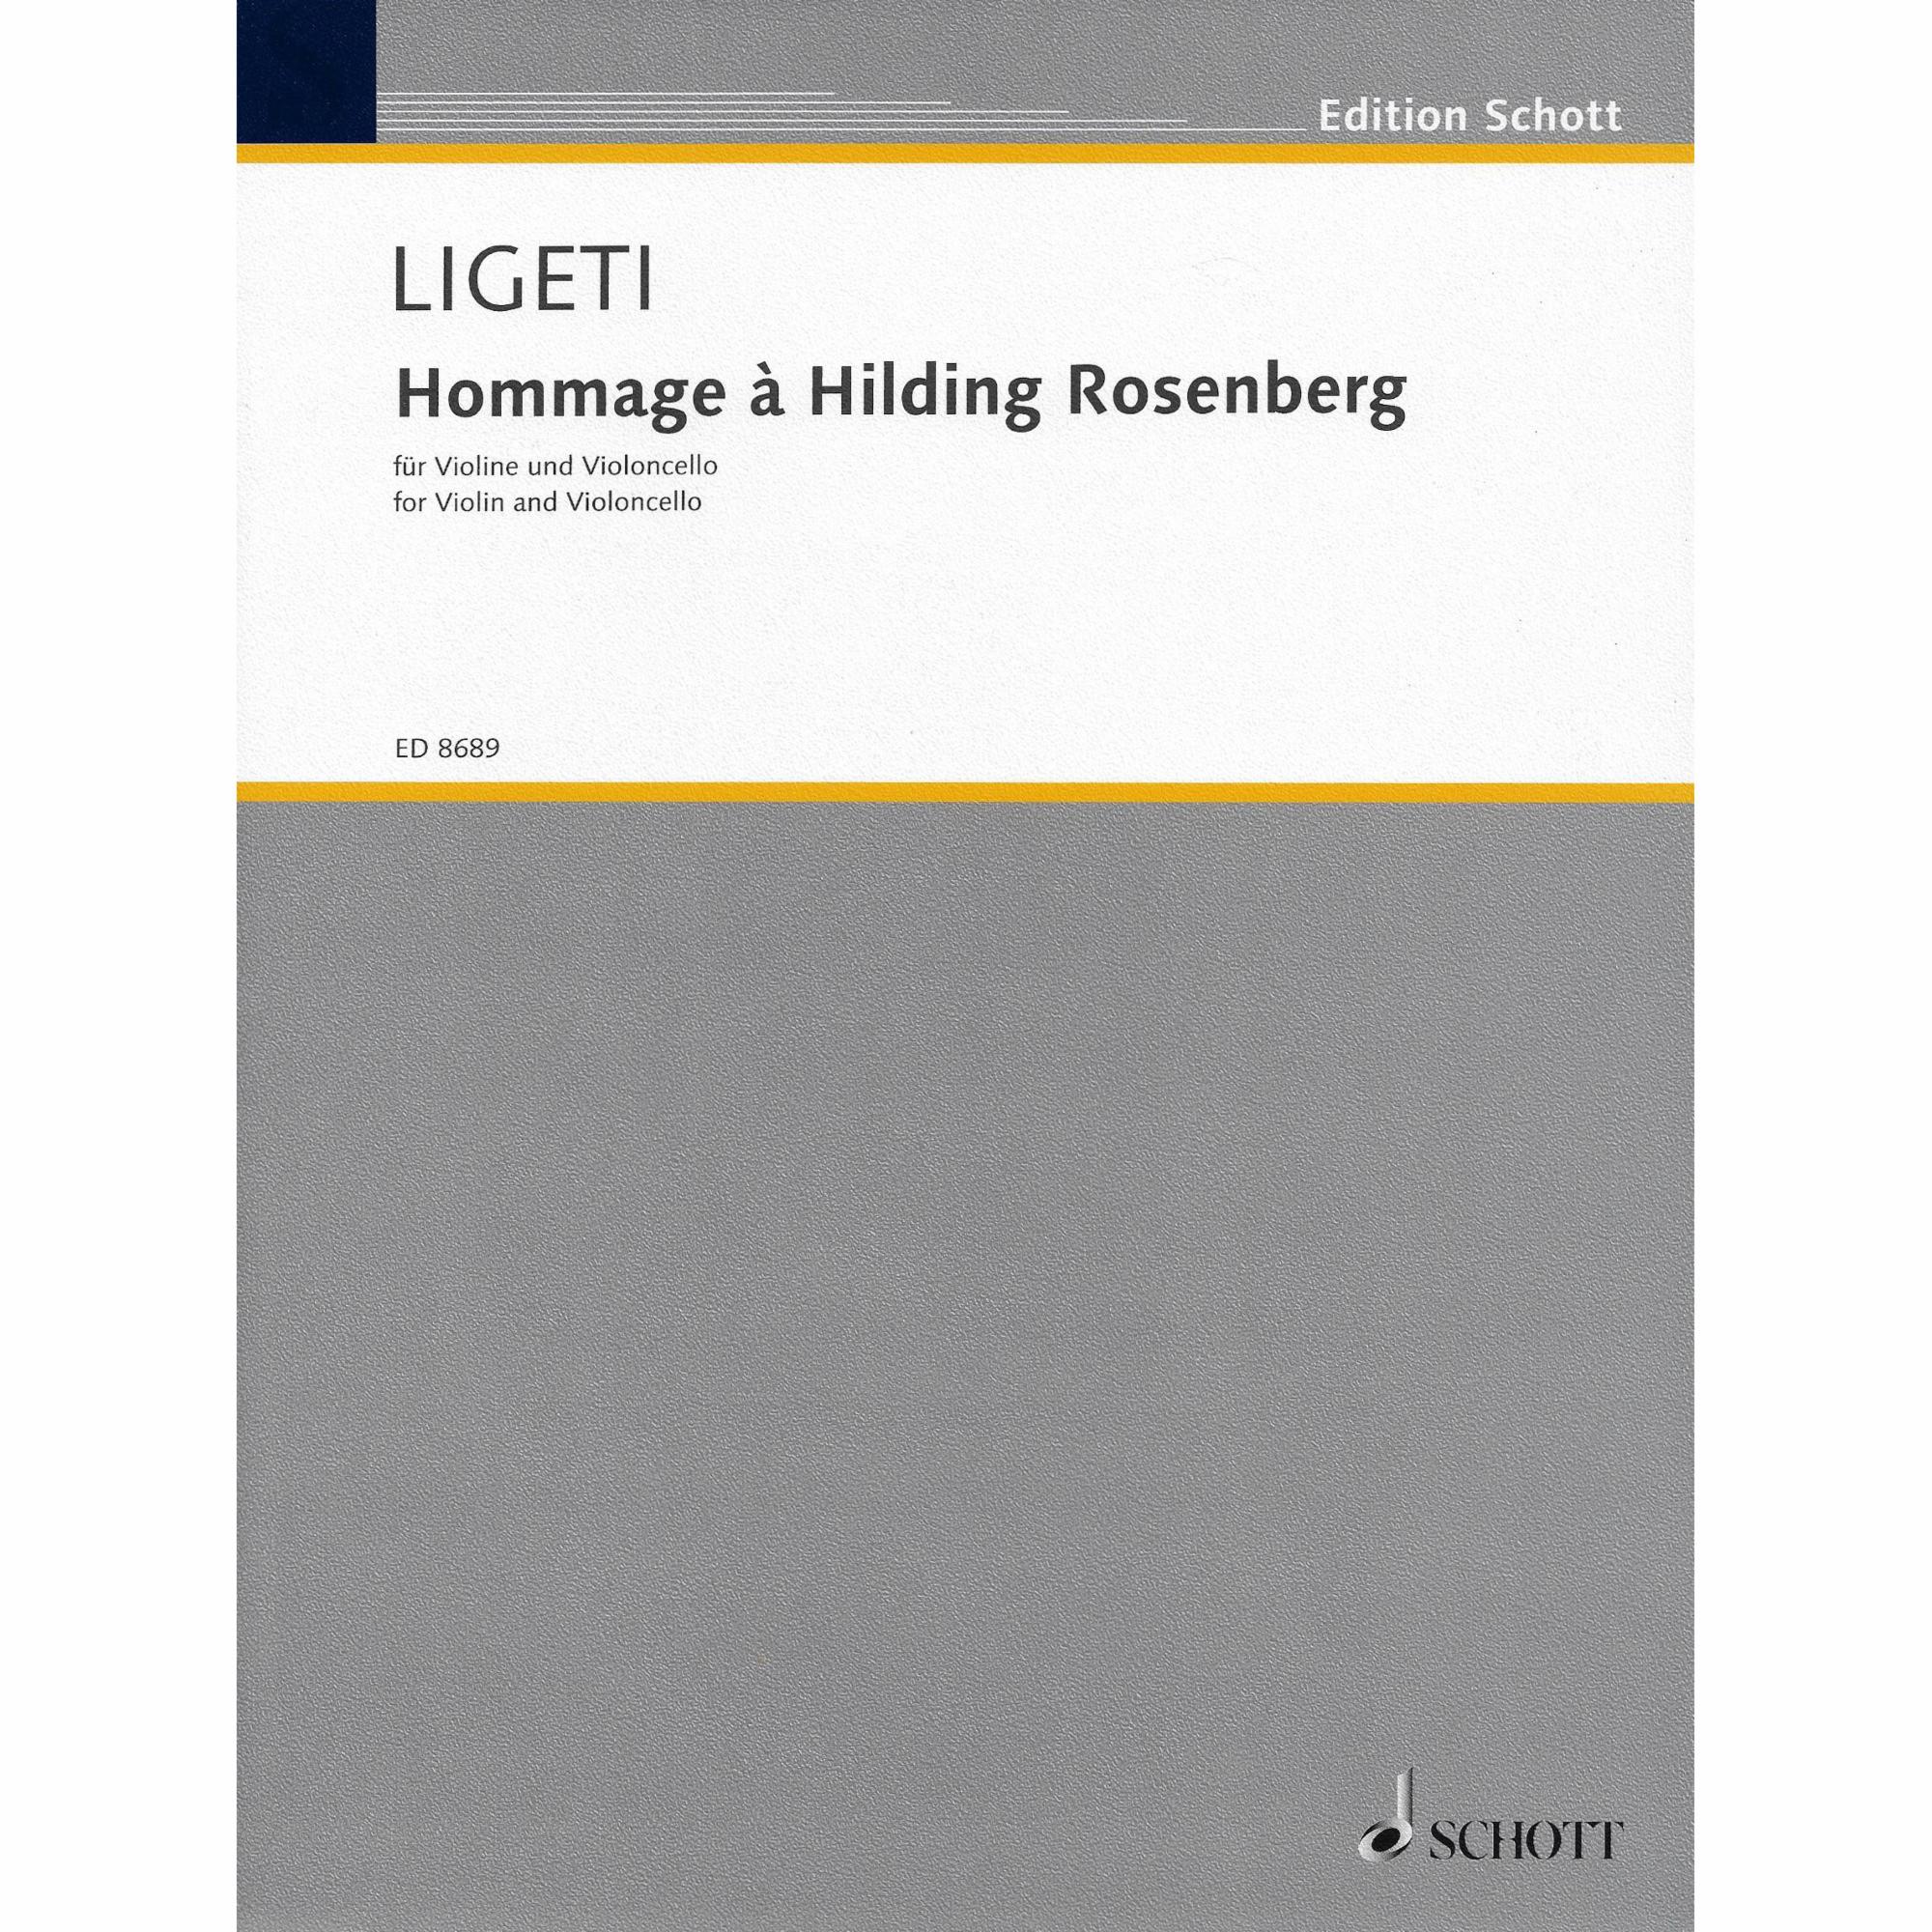 Ligeti -- Hommage a Hilding Rosenberg for Violin and Cello